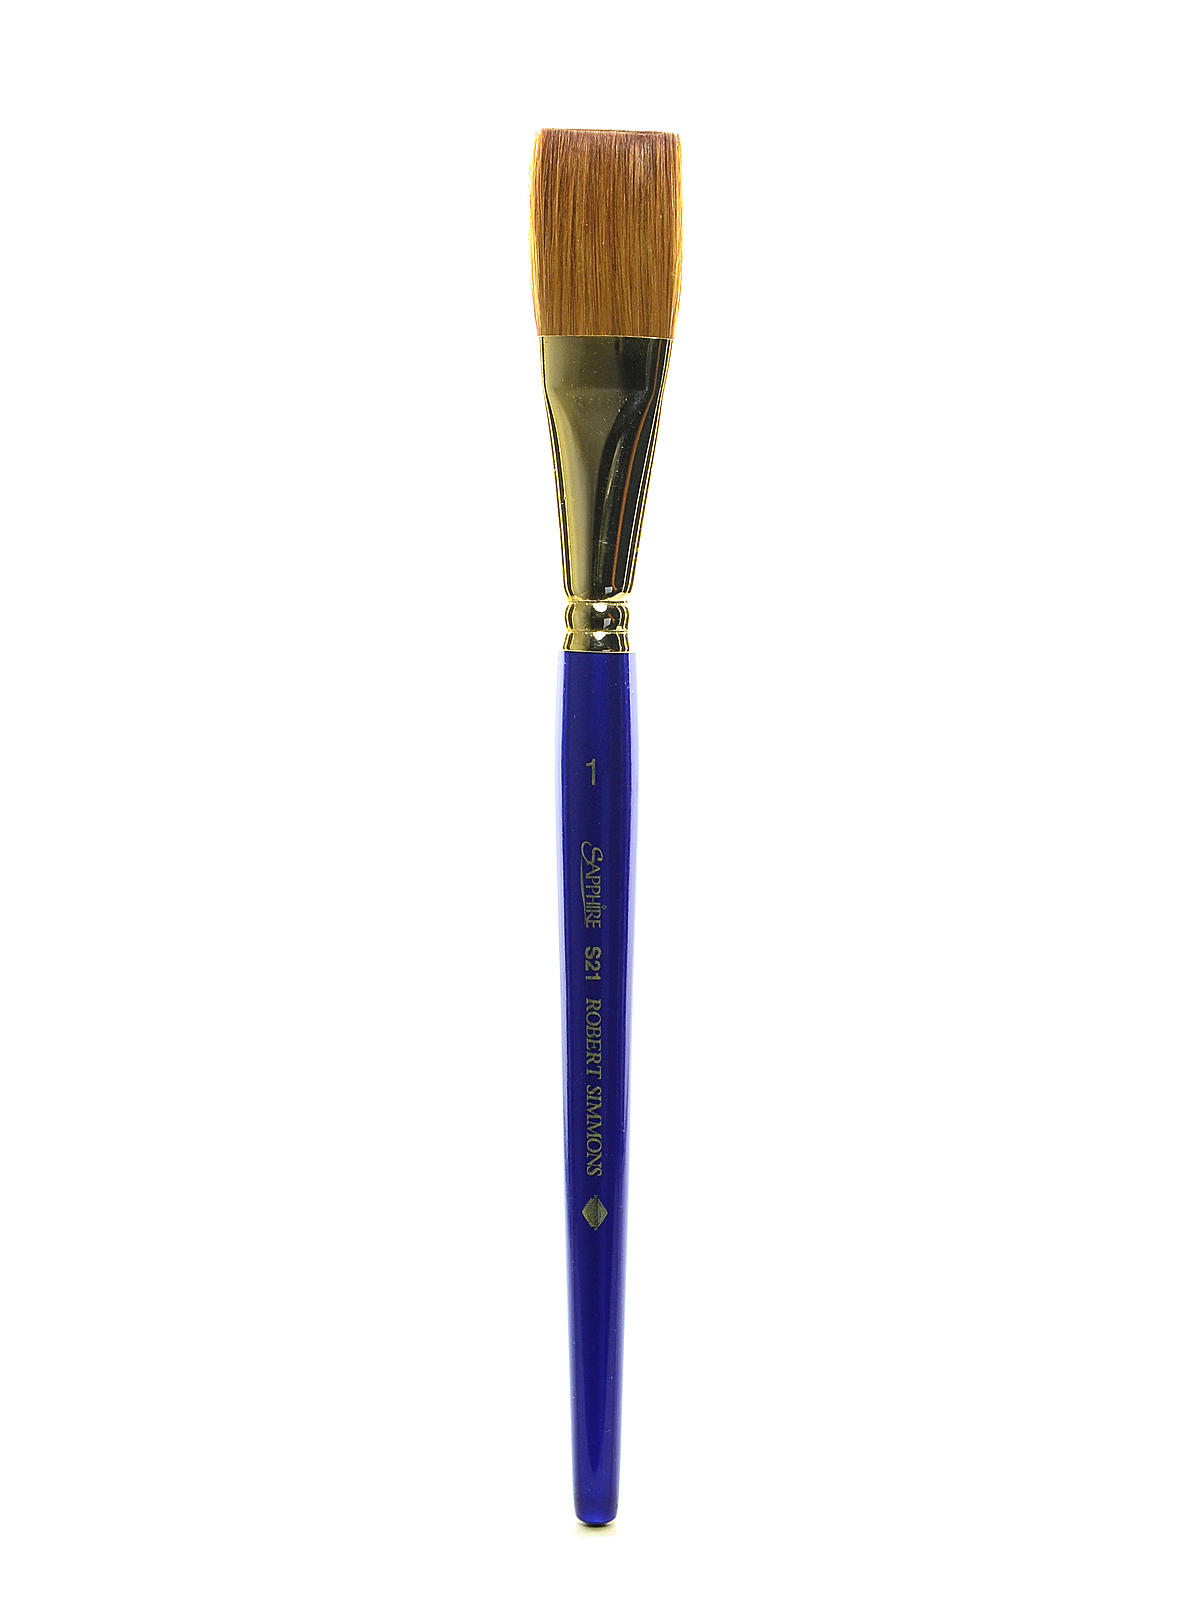 Sapphire Series Synthetic Brushes Short Handle 1 In. One Stroke Flat Wash S21